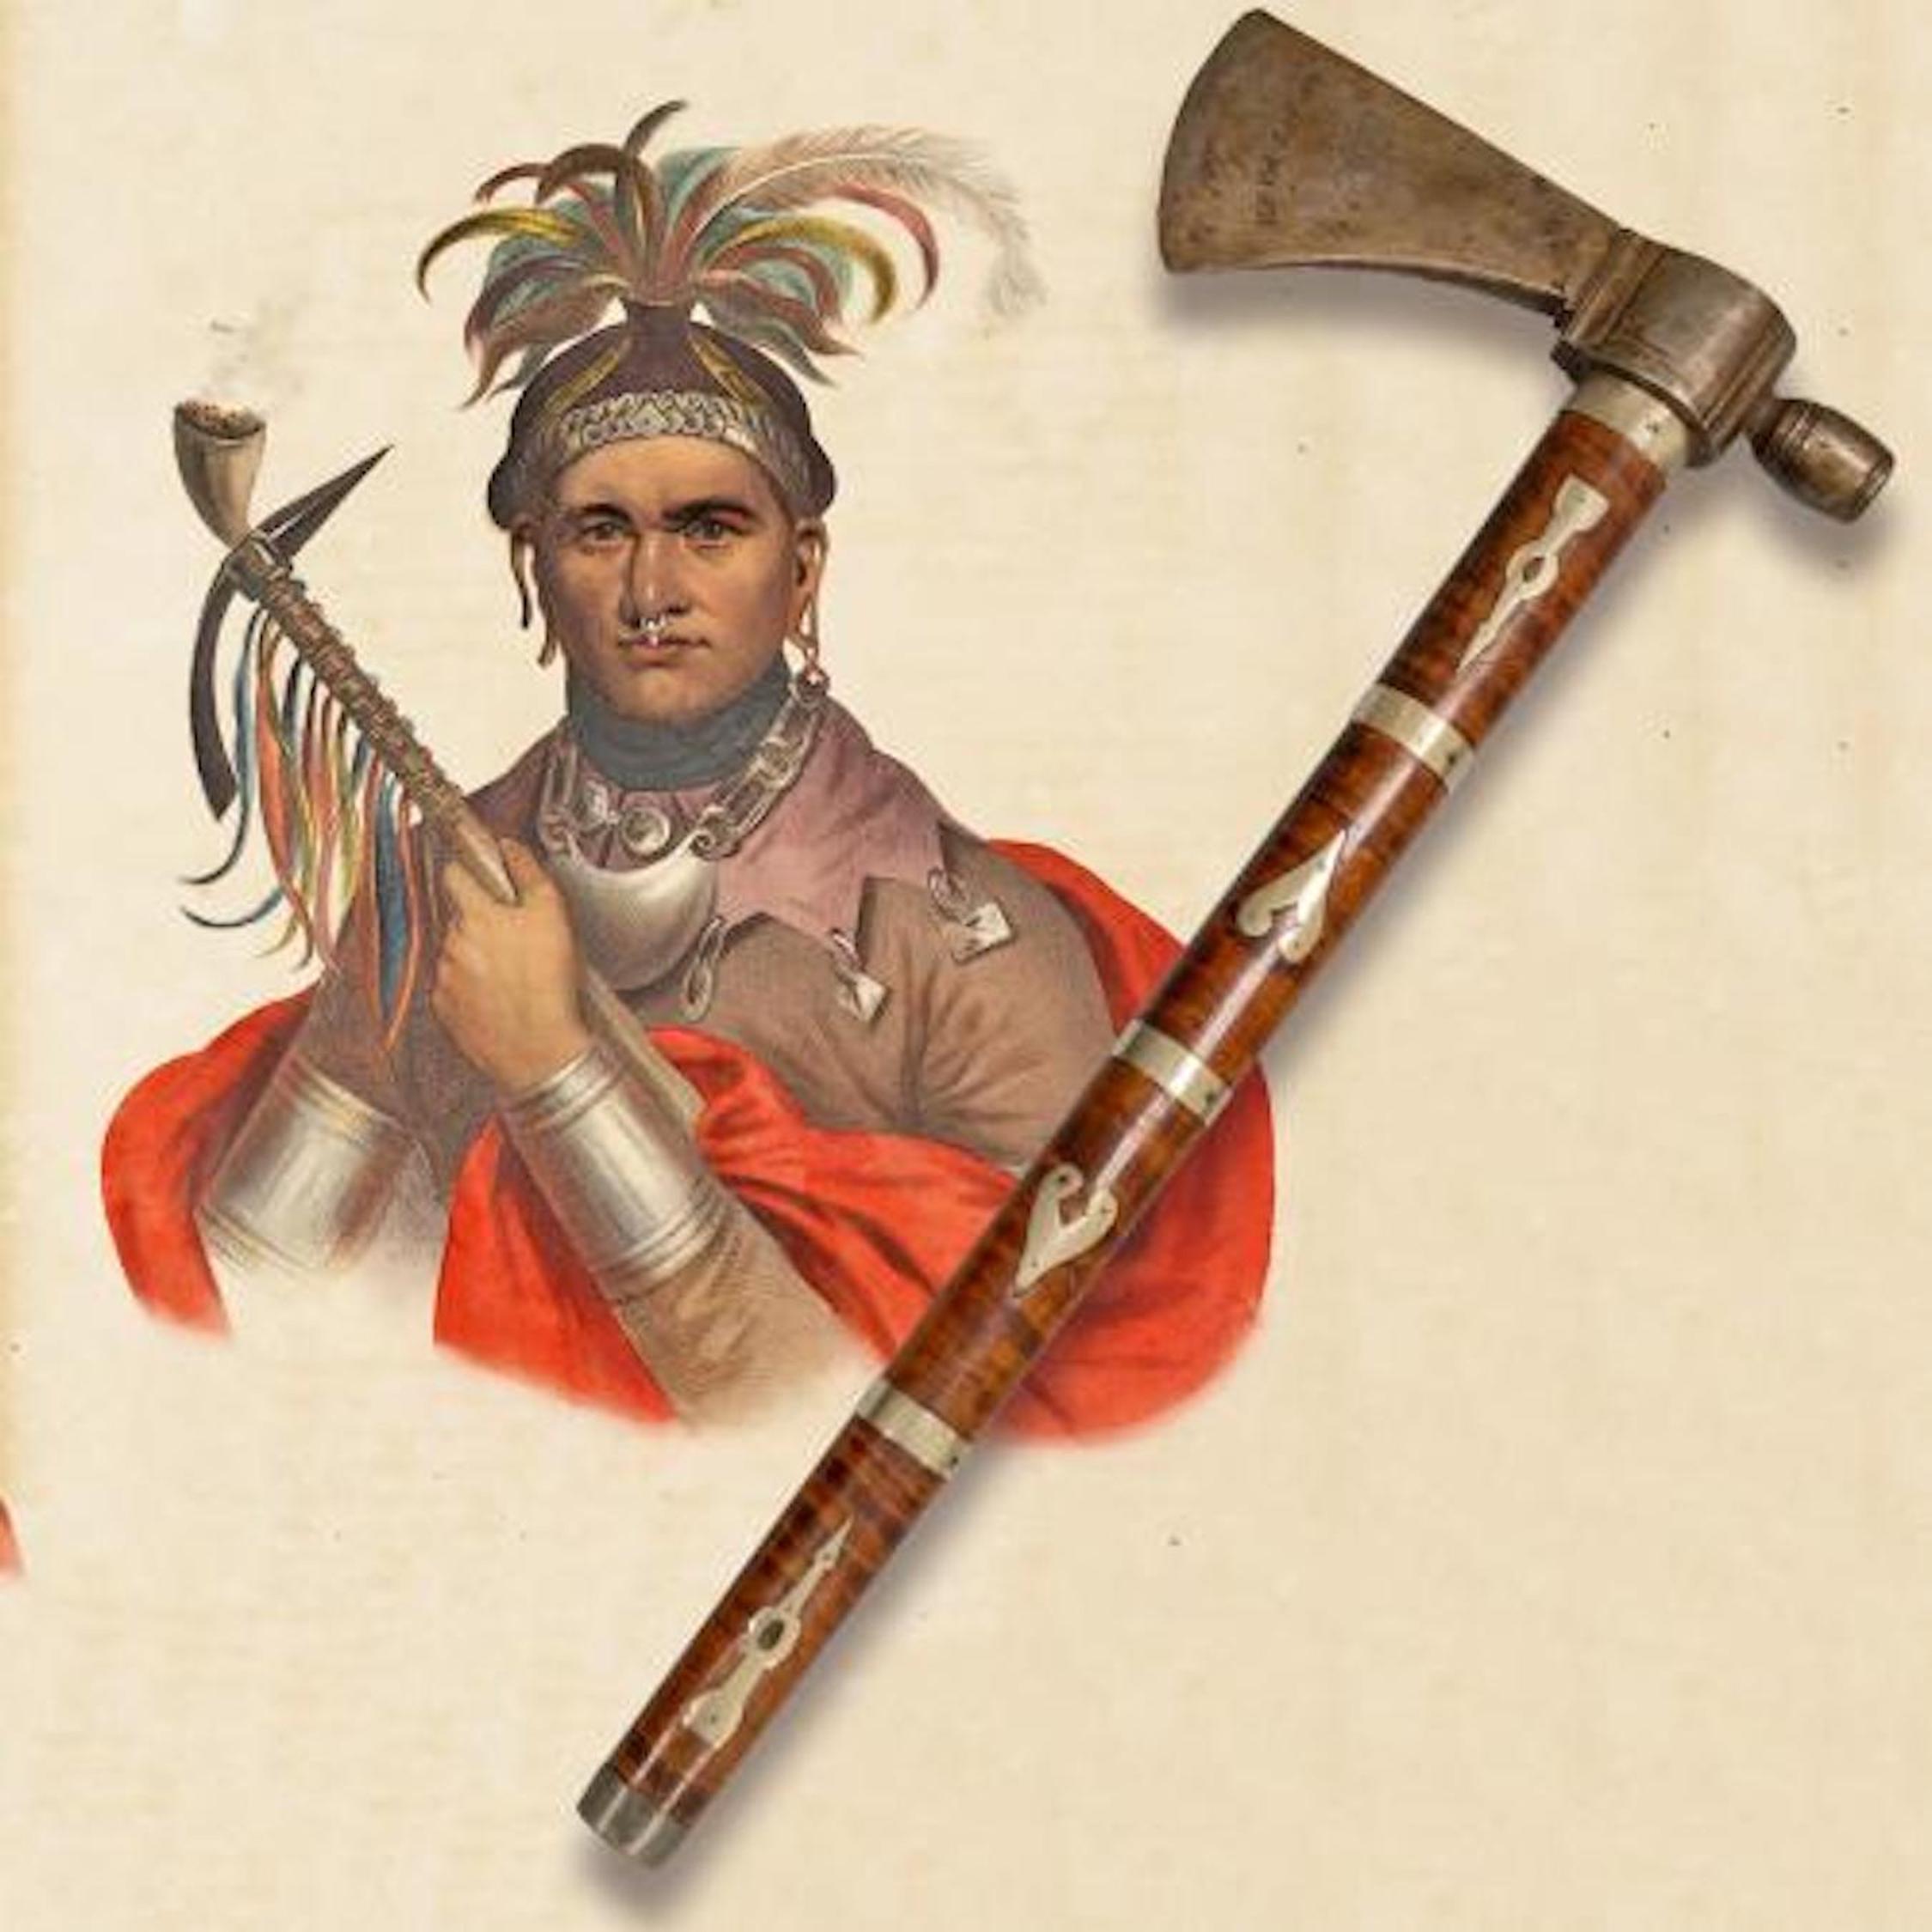 Washington gave Cornplanter a peace pipe tomahawk, shown here resting on a print of the Seneca chief. Image courtesy of the Seneca-Iroquois National Museum.